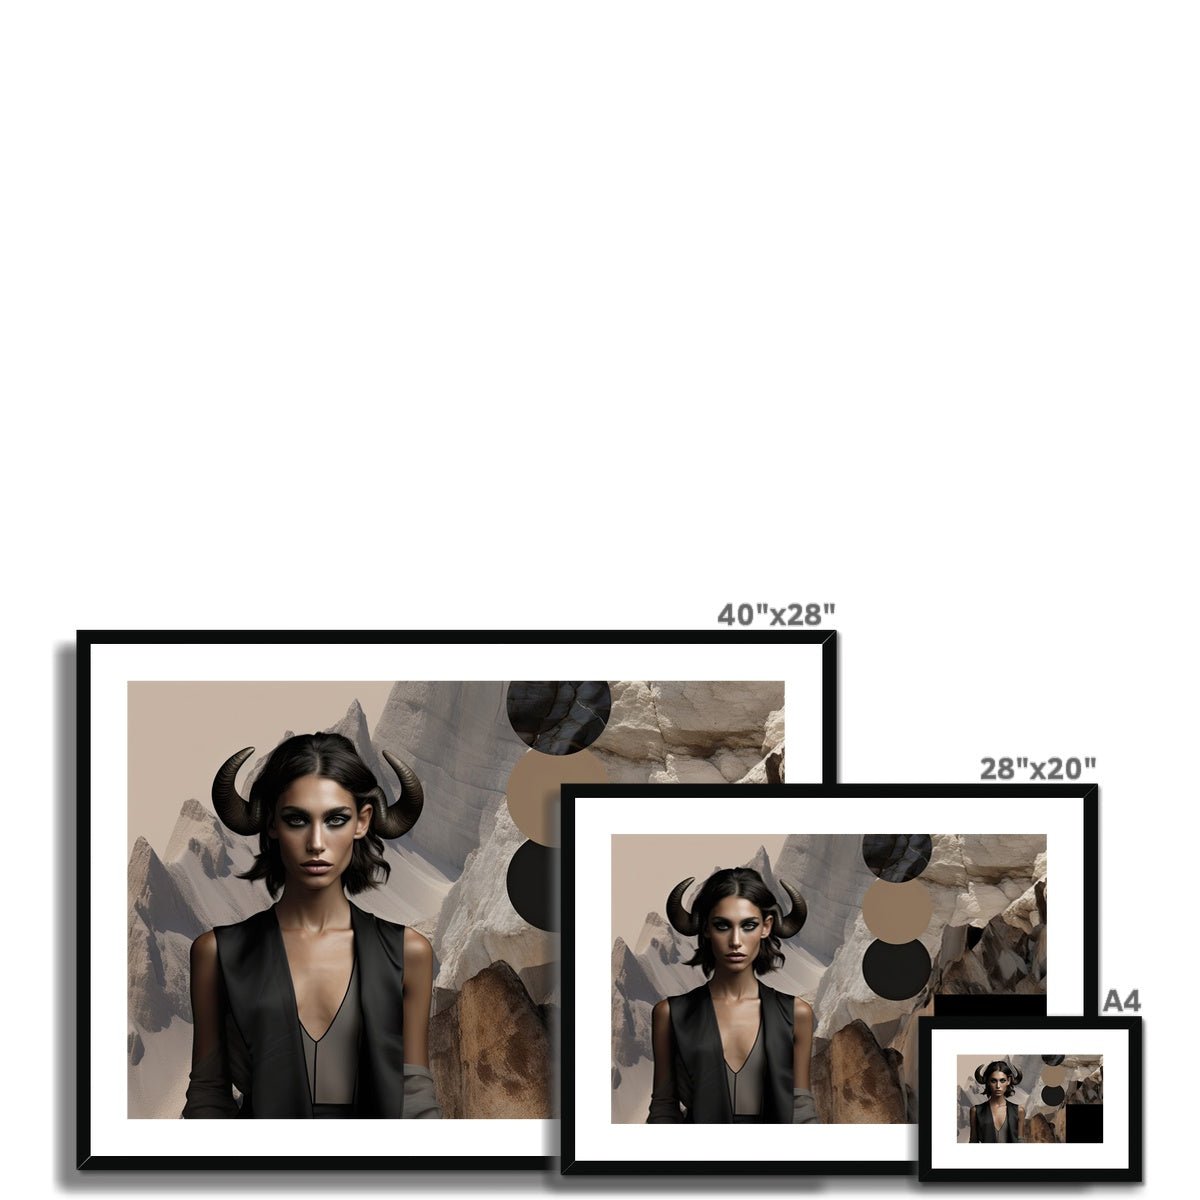 Capricorn Framed & Mounted Print - Pixel Gallery